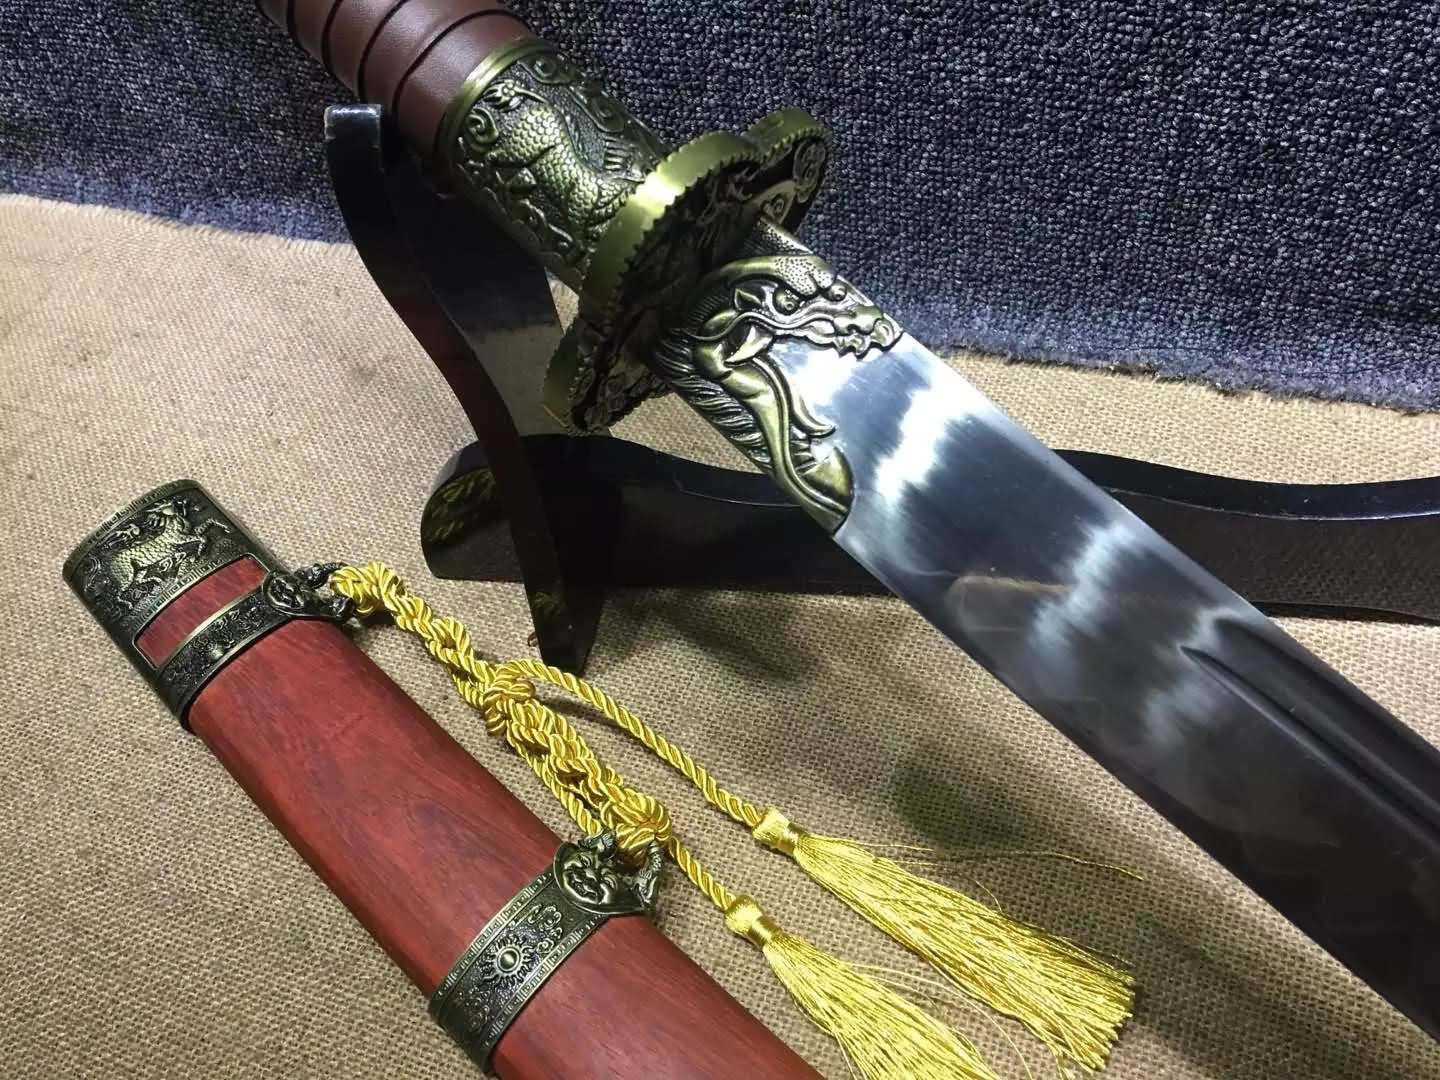 China chop sabers,High carbon steel,Alloy fitted,Redwood scabbard - Chinese sword shop